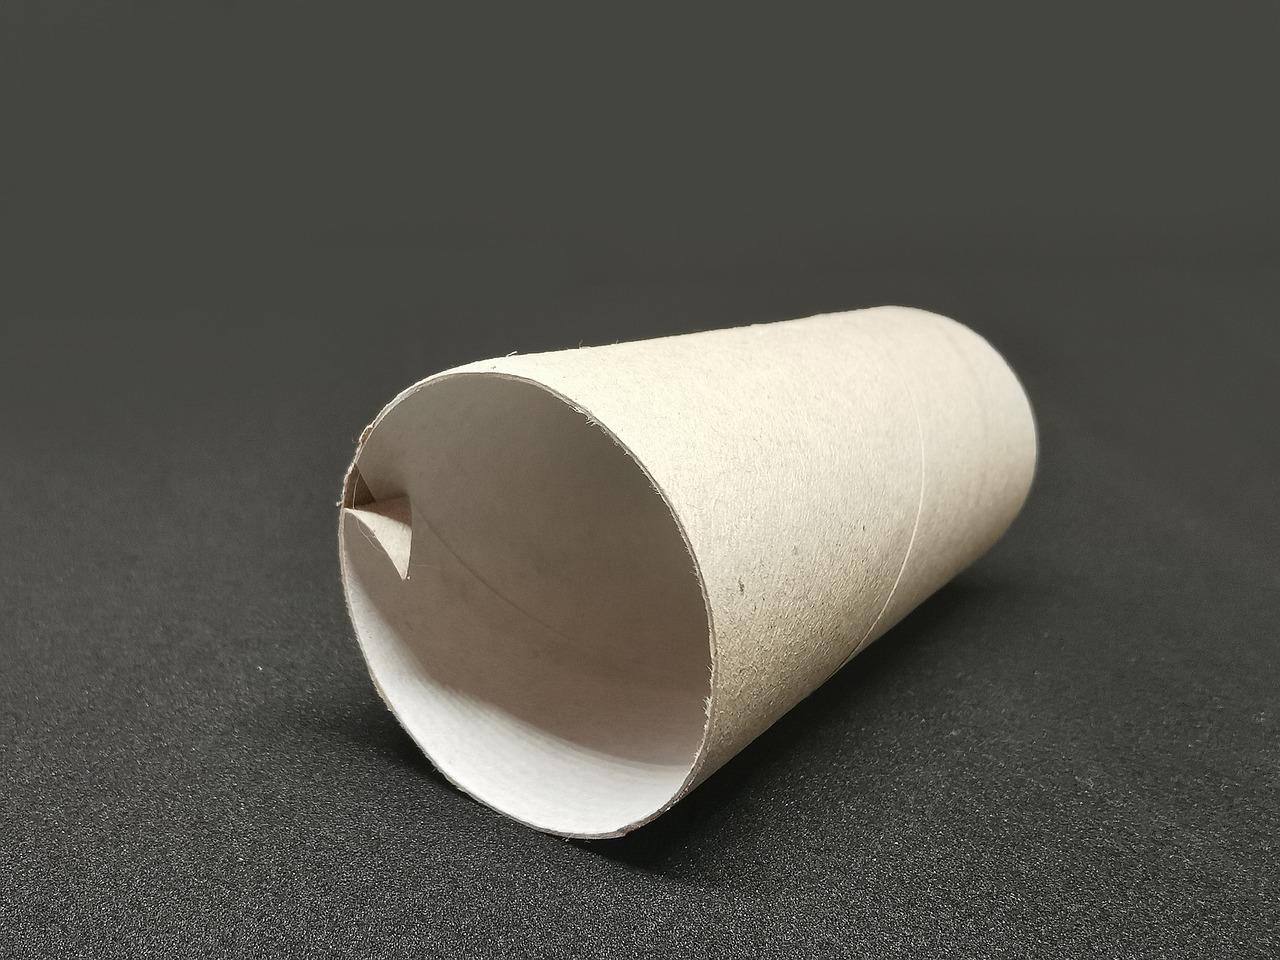 What is the thing inside the toilet paper called? 